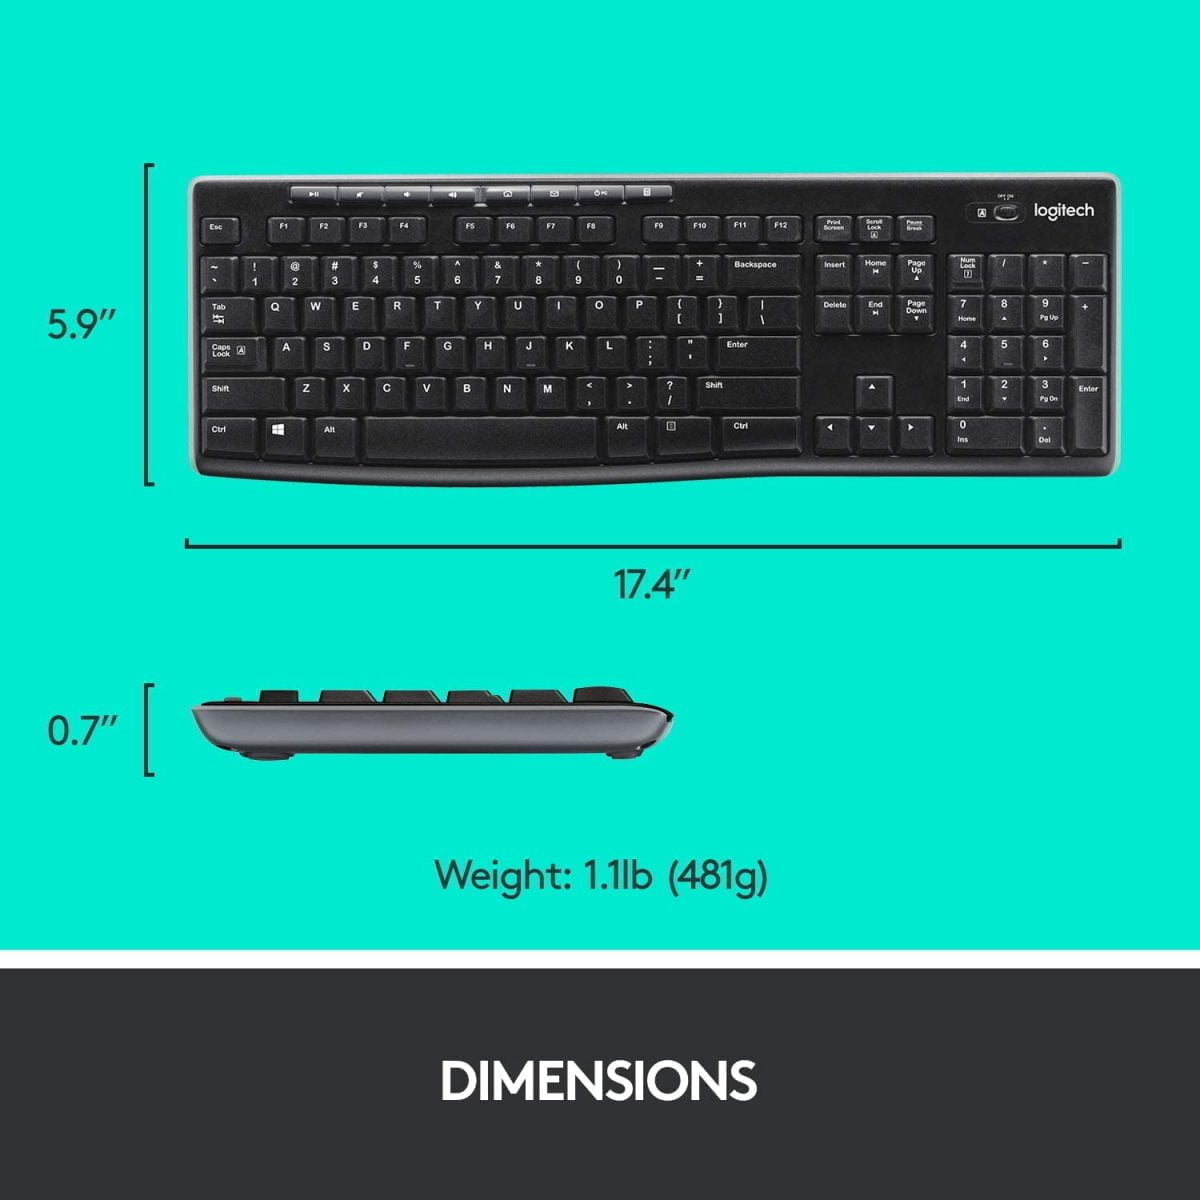 71Dwkfdm08L. Ac Sl1500 لوجيتك Https://Www.youtube.com/Watch?V=Hhwya1Rlfts 4 Ghz Wireless Connection: A Tiny Logitech Unifying Receiver Connects Both The Keyboard And Mouse Using Just One Usb Port
Long Battery Life: Get Up To 24 Months Of Keyboard Power And 12 Months Of Mouse Power Without Changing Batteries (Keyboard And Mouse Battery Life May Vary Based On User And Computing Conditions)
No Software Installation Required لوجيتك – كومبو لاسلكي Mk270 مع لوحة مفاتيح وماوس – أسود